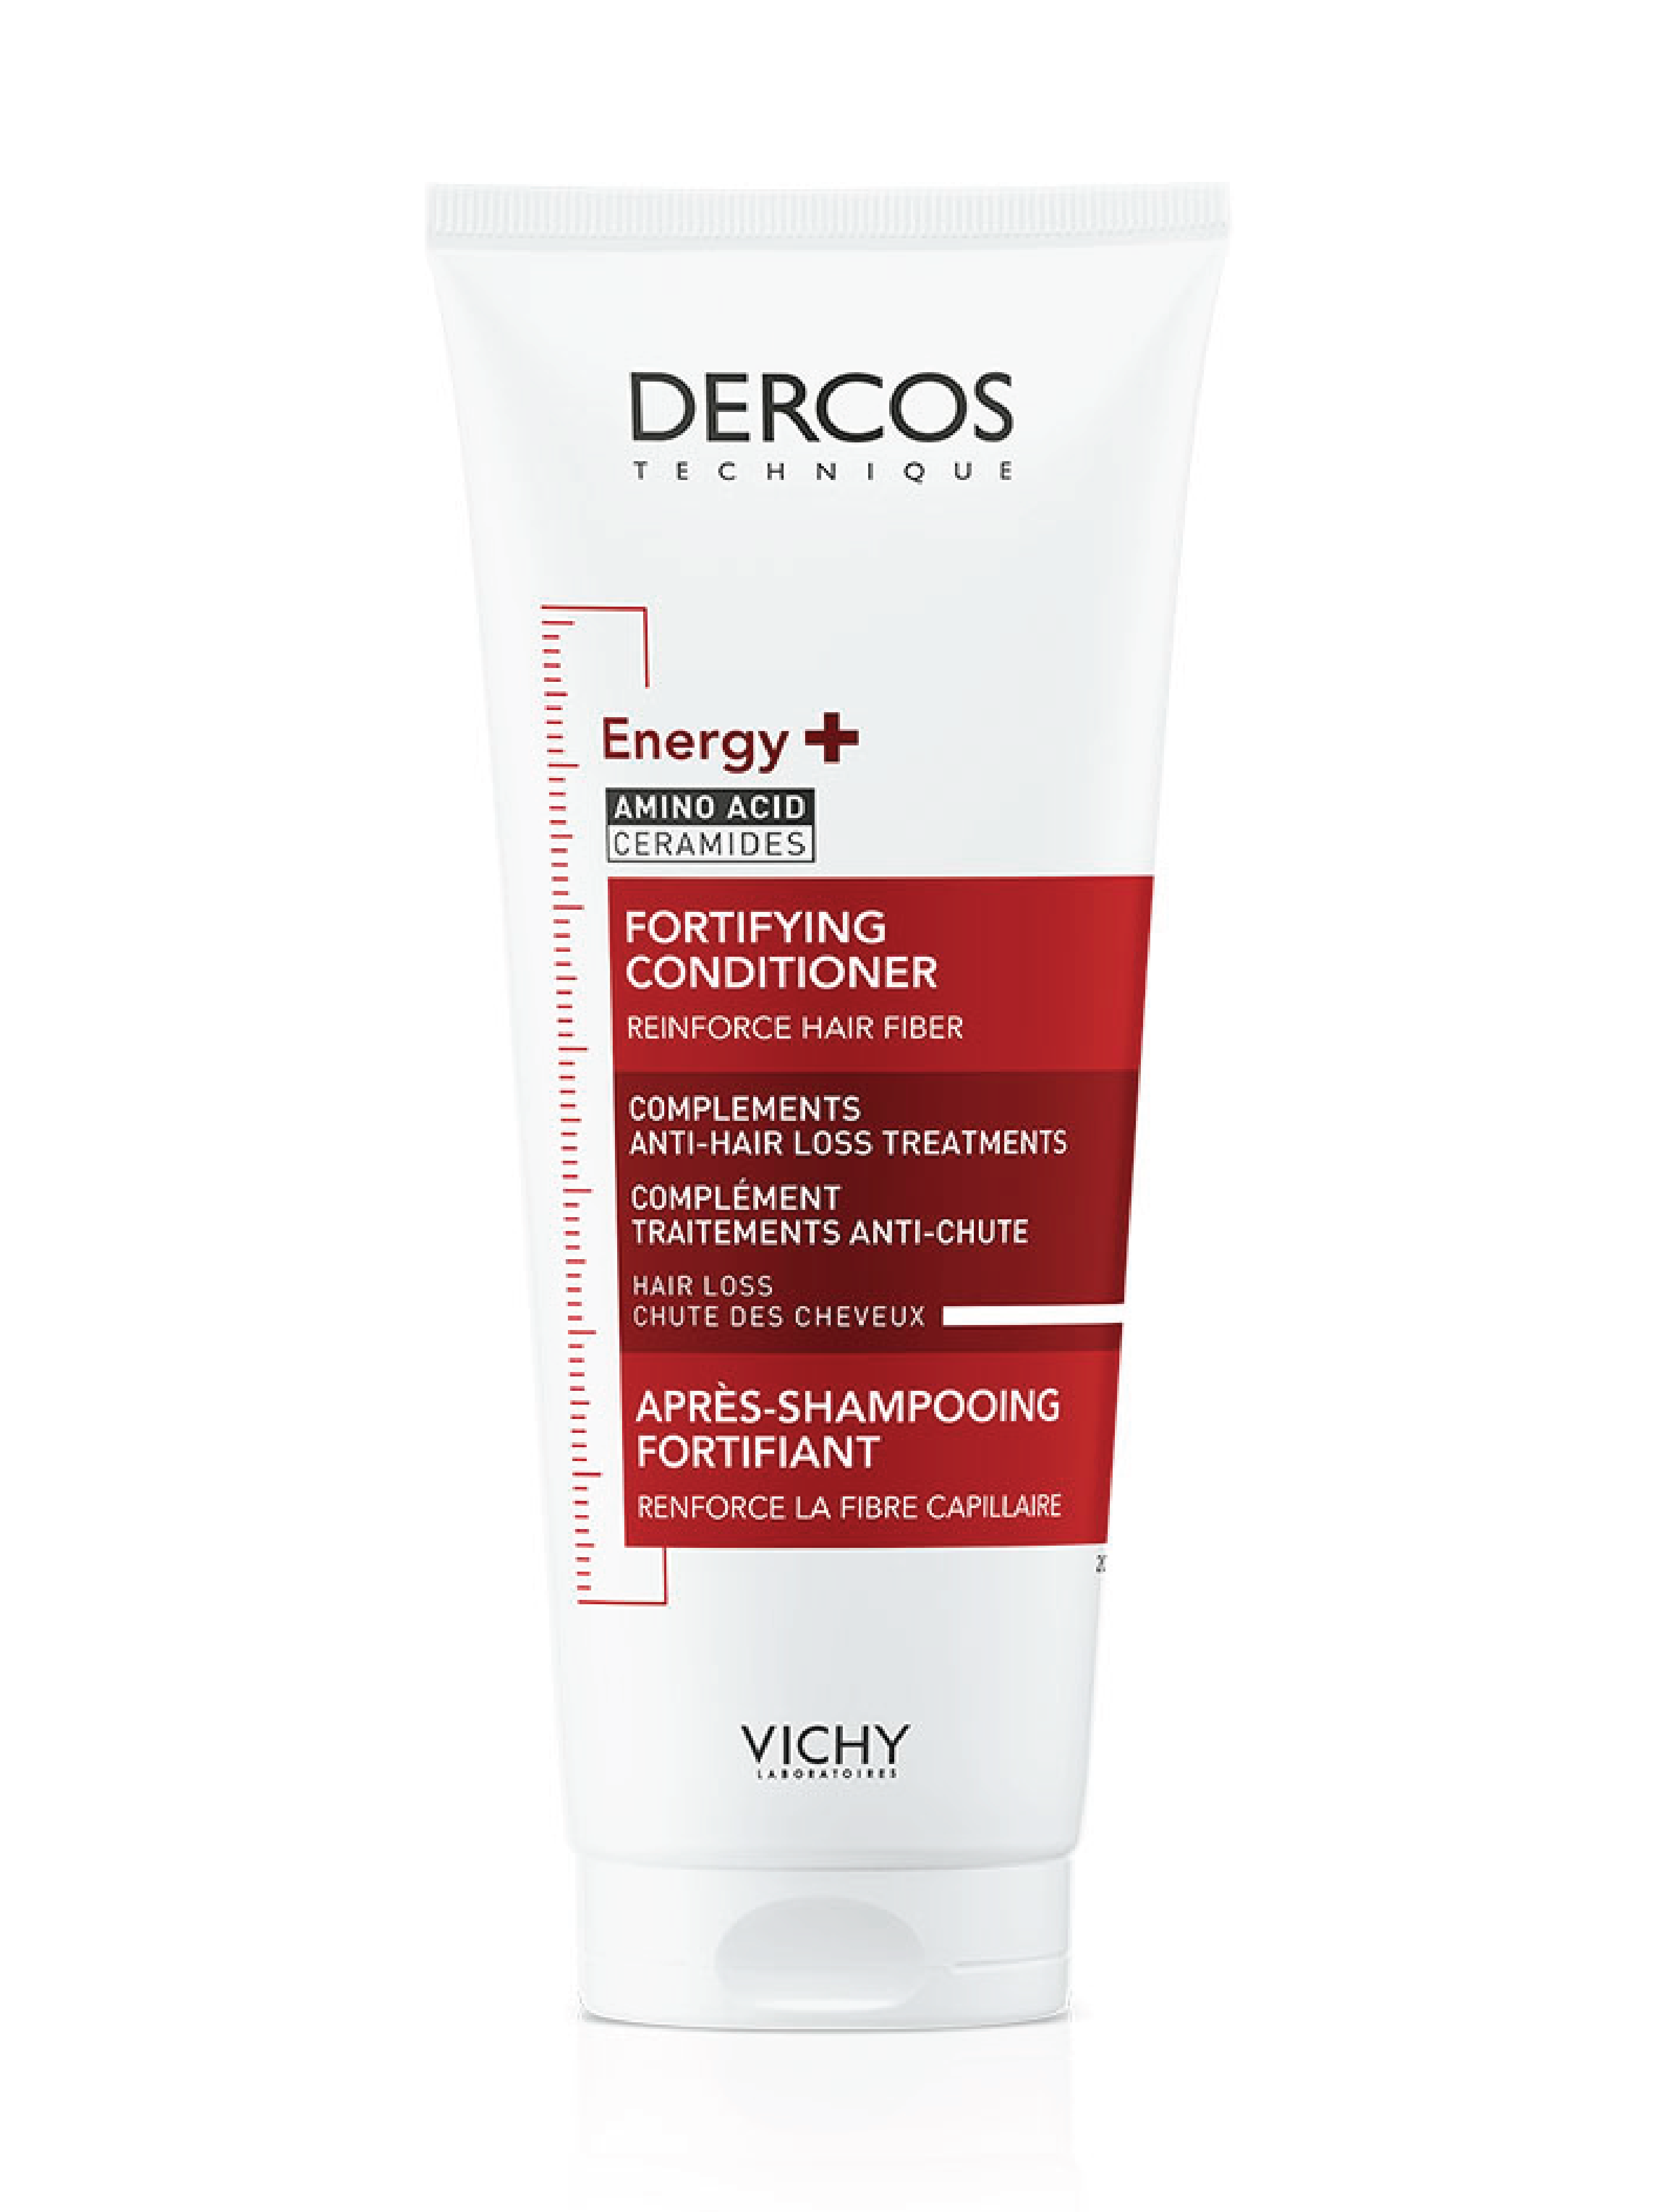 Vichy Dercos Energy+ Fortifying Conditioner, 200 ml